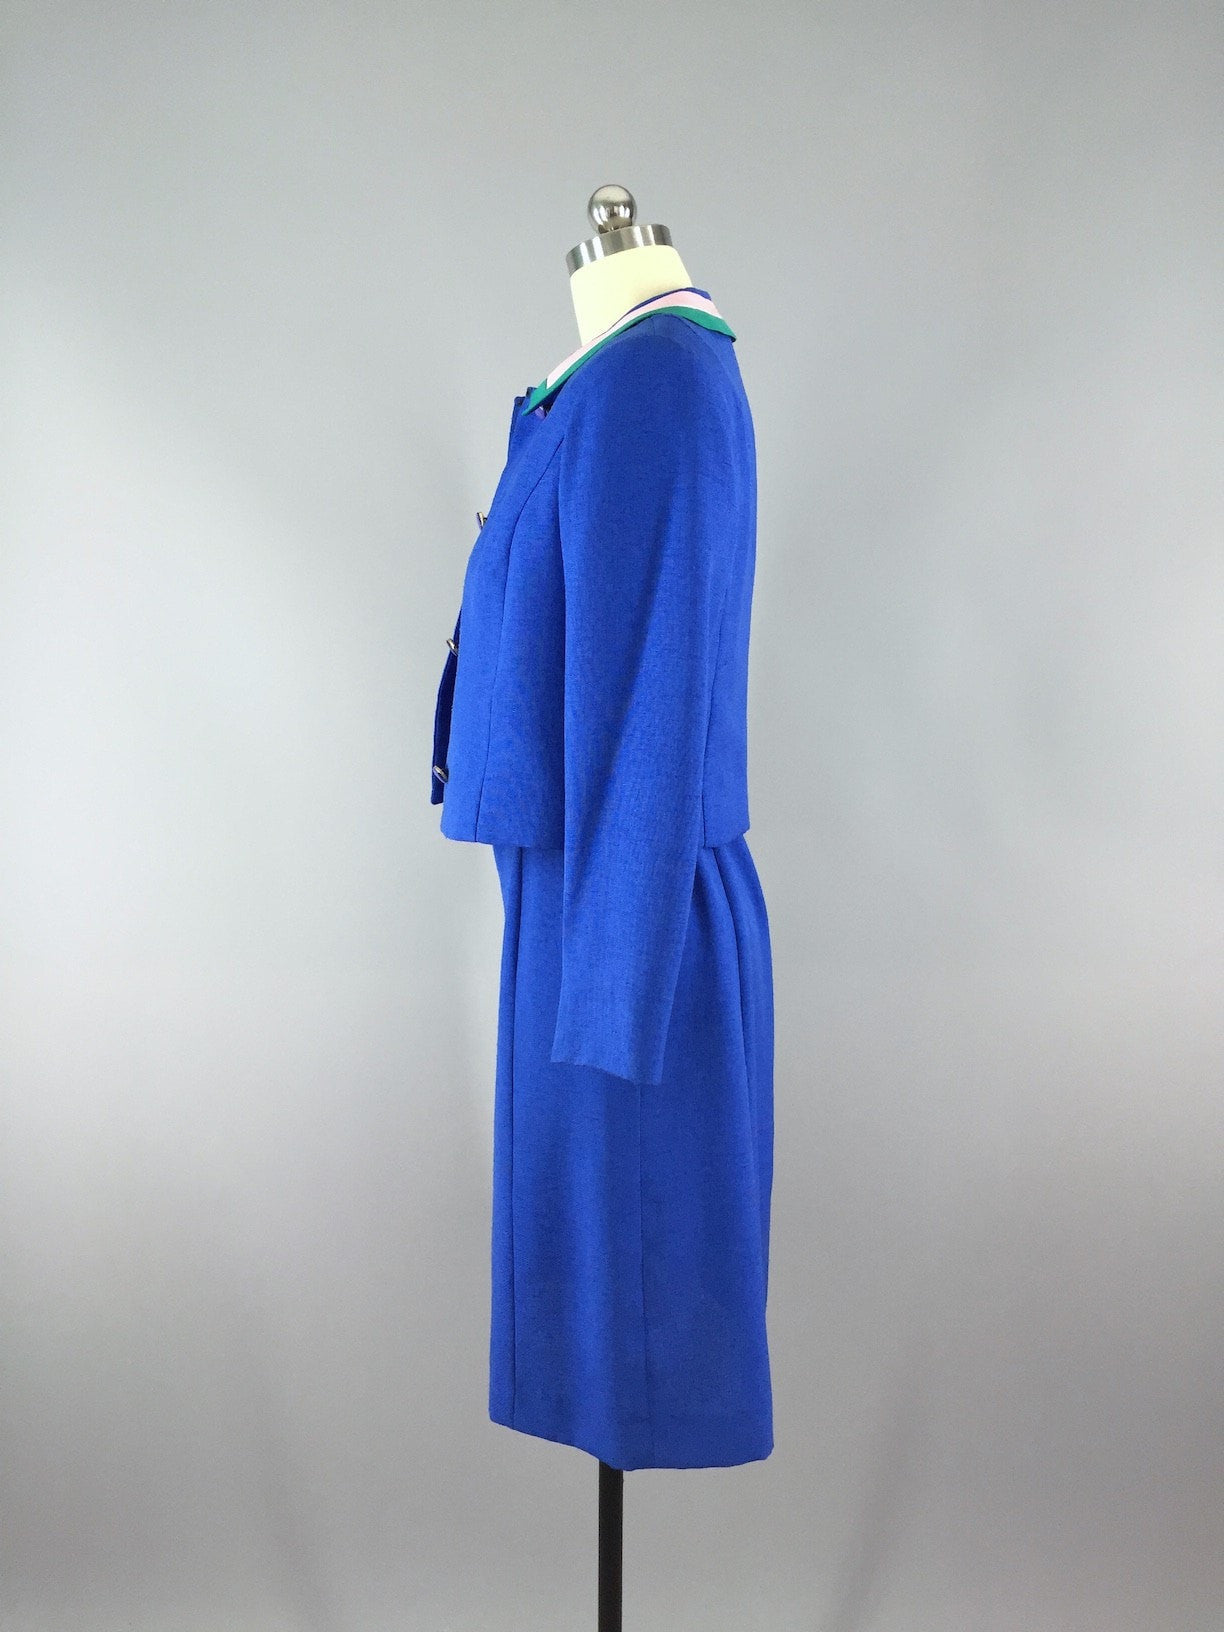 Vintage 1960s Suit / Dress and Jacket - ThisBlueBird